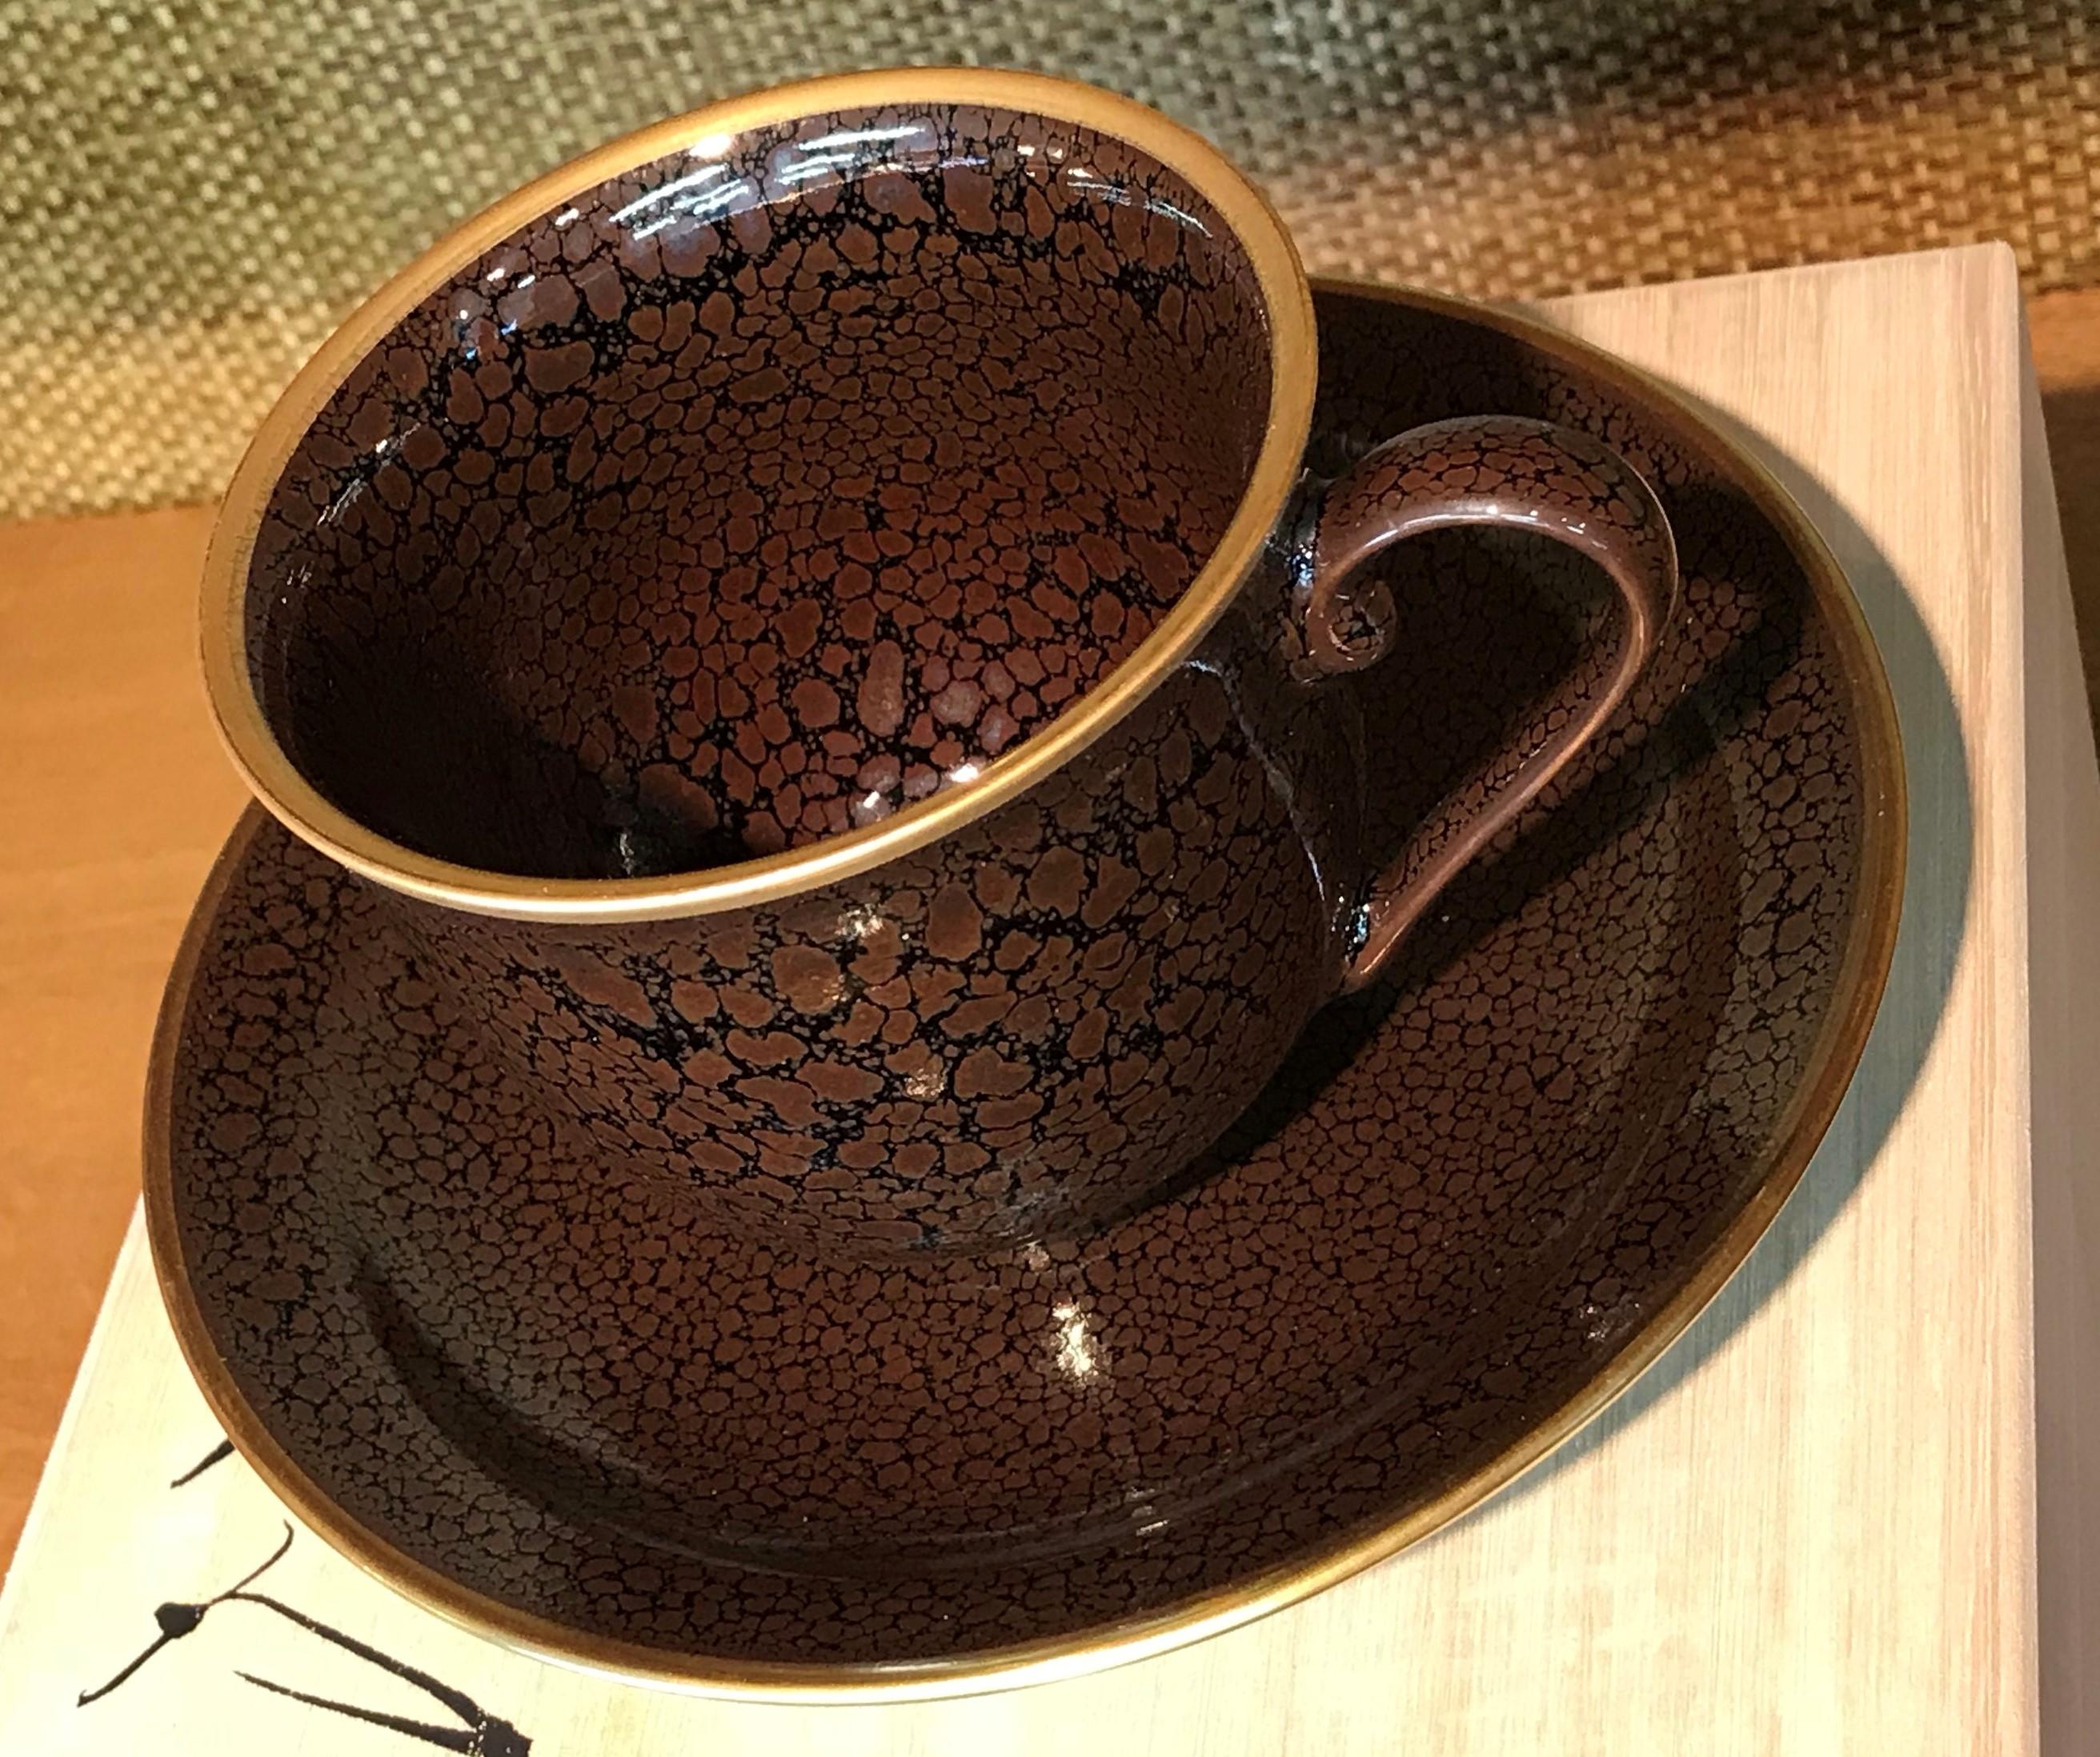 Gilt Japanese Gilded Hand-Glazed Brown Porcelain Cup and Saucer by Master Artist